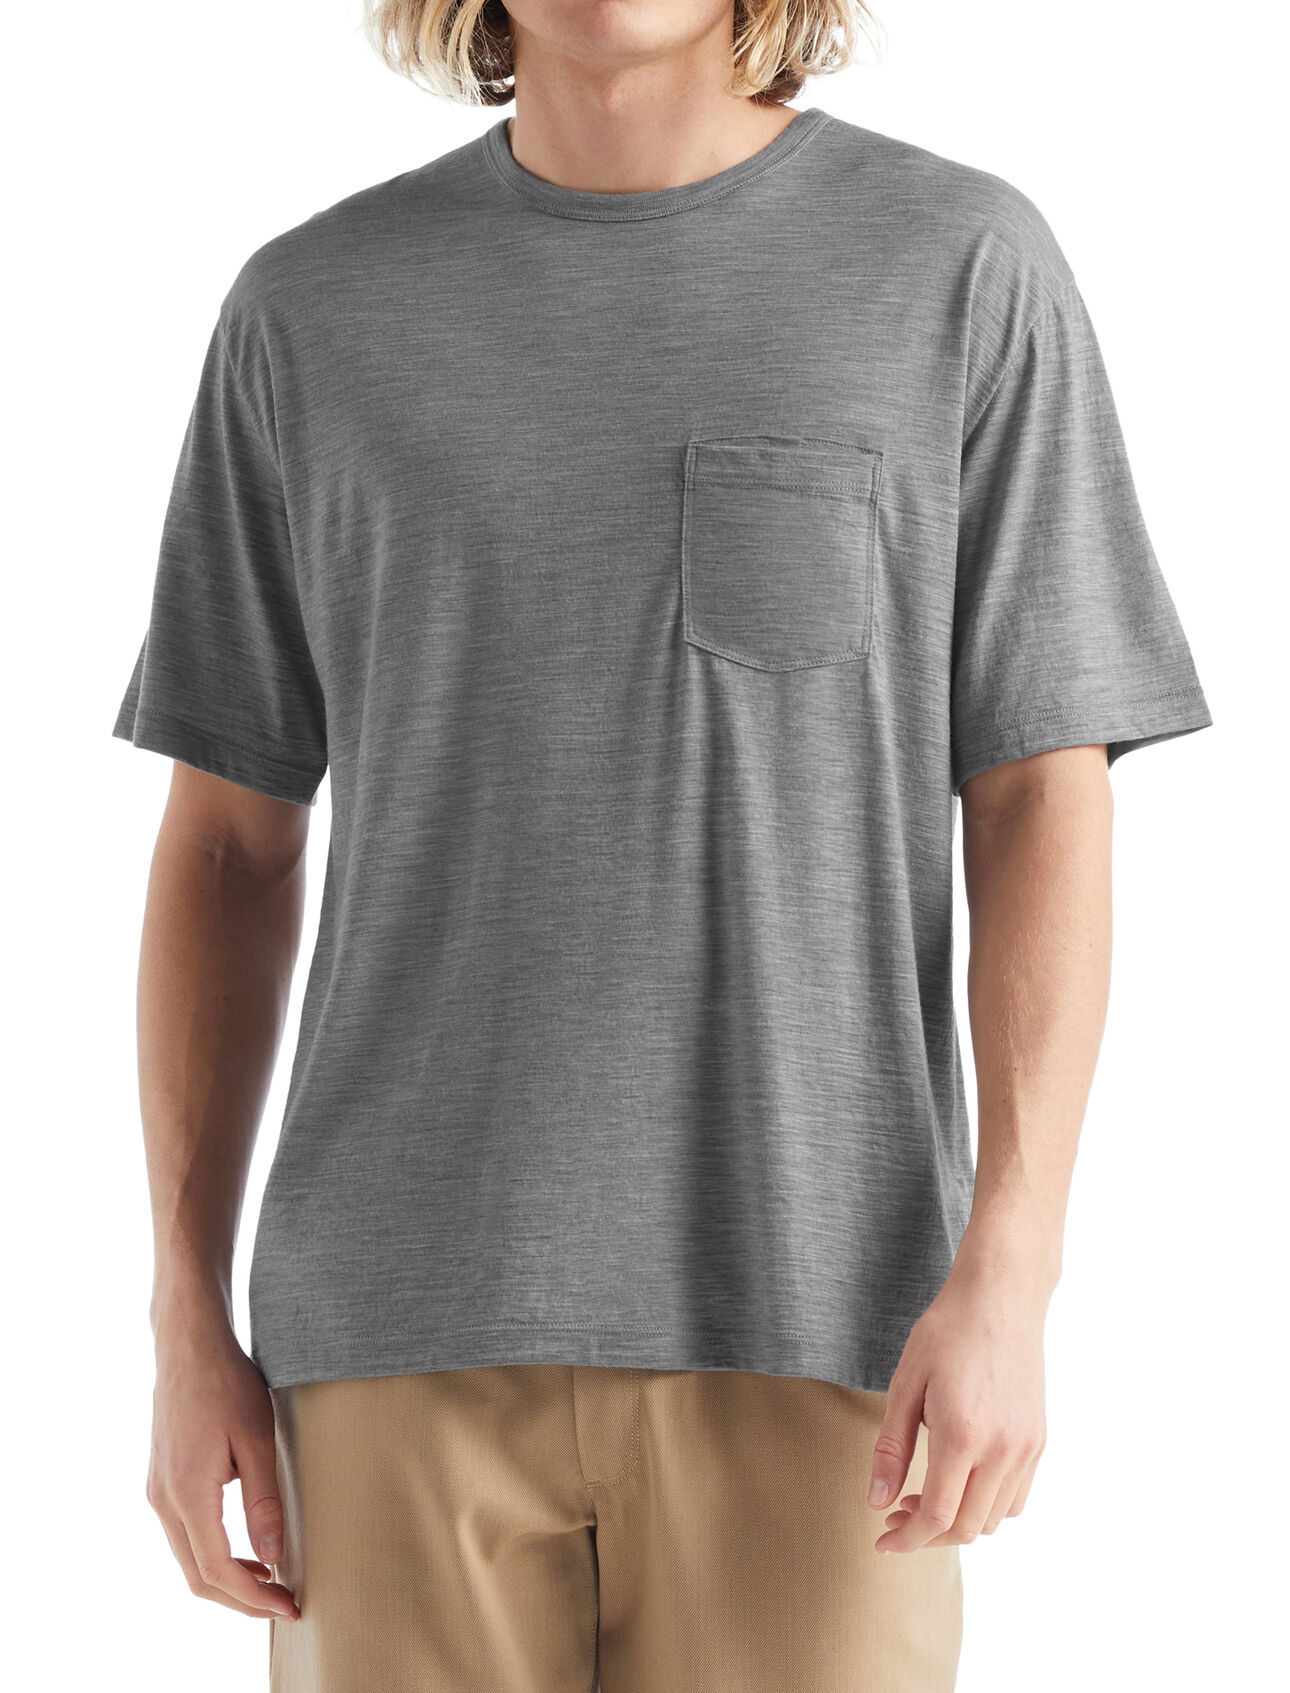 Mens Merino Granary Short Sleeve Pocket T-Shirt A classic pocket tee with a relaxed fit and soft, breathable, 100% merino wool fabric, the Granary Short Sleeve Pocket Tee is all about everyday comfort and style.